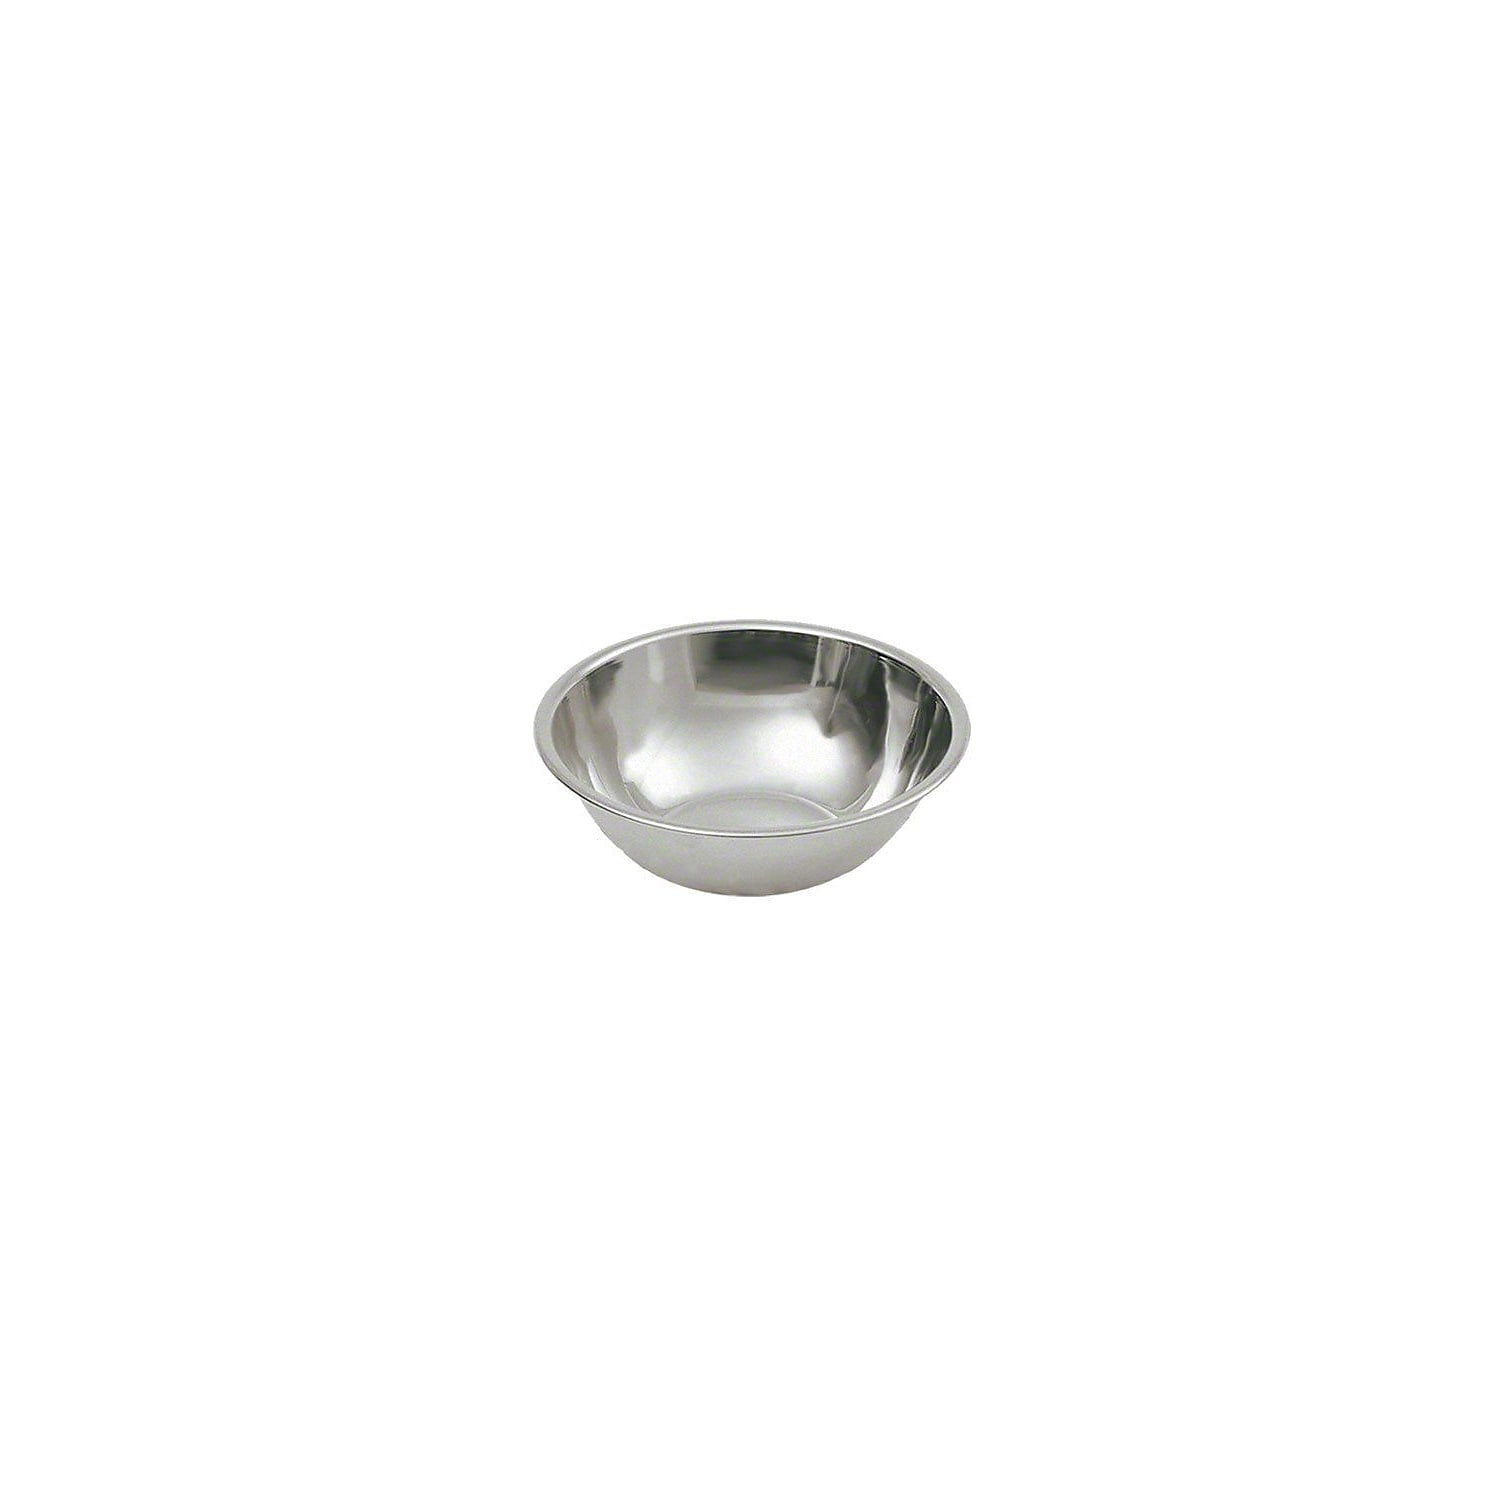 ABC MBR-16 Economy Mixing Bowl, Stainless Steel - 16 qt - Bargreen Ellingson